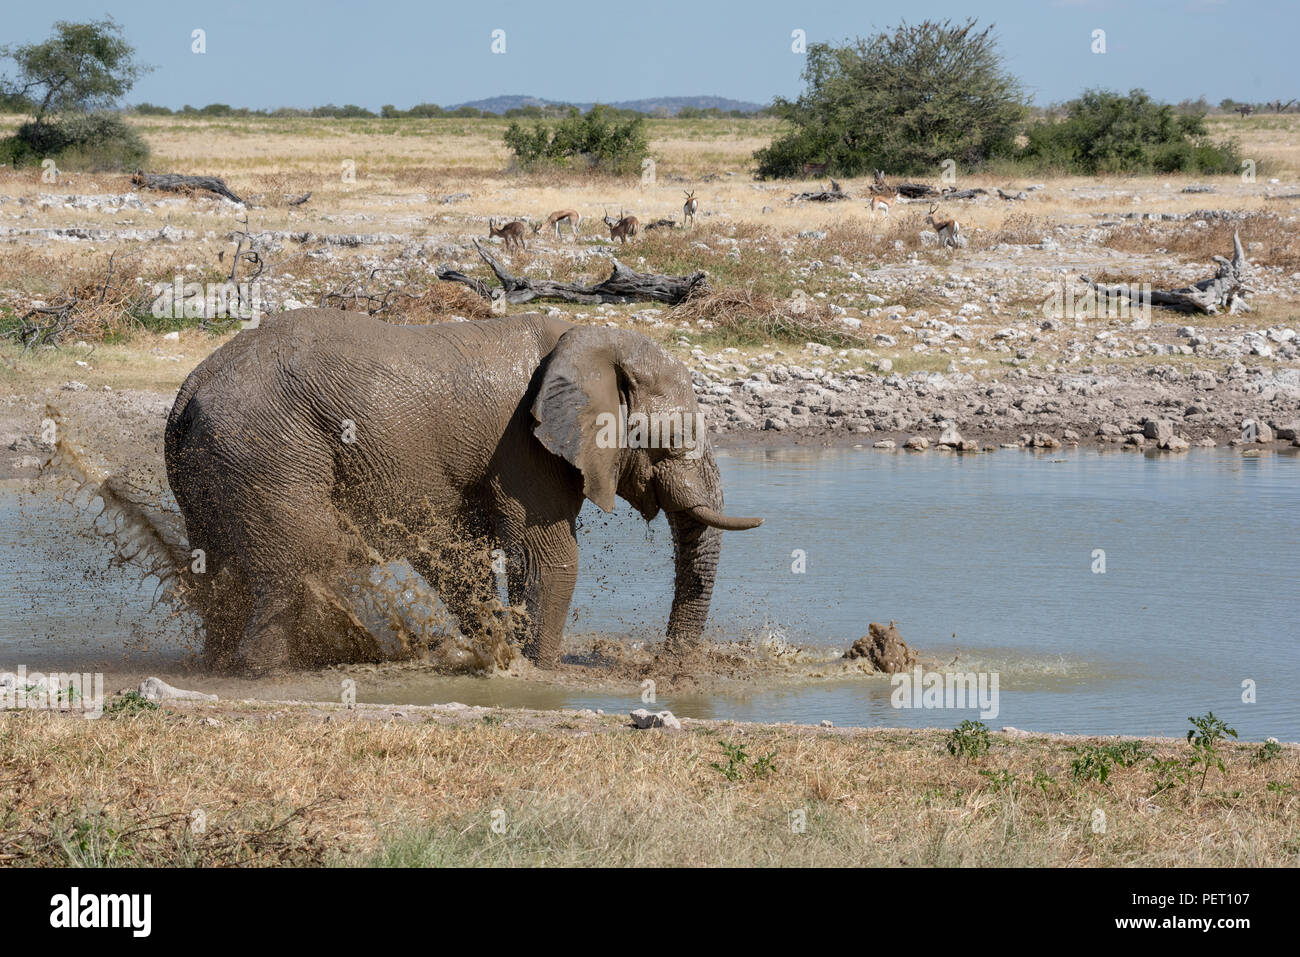 Large elephant at waterhole playing with water and cooling down in the heat Stock Photo